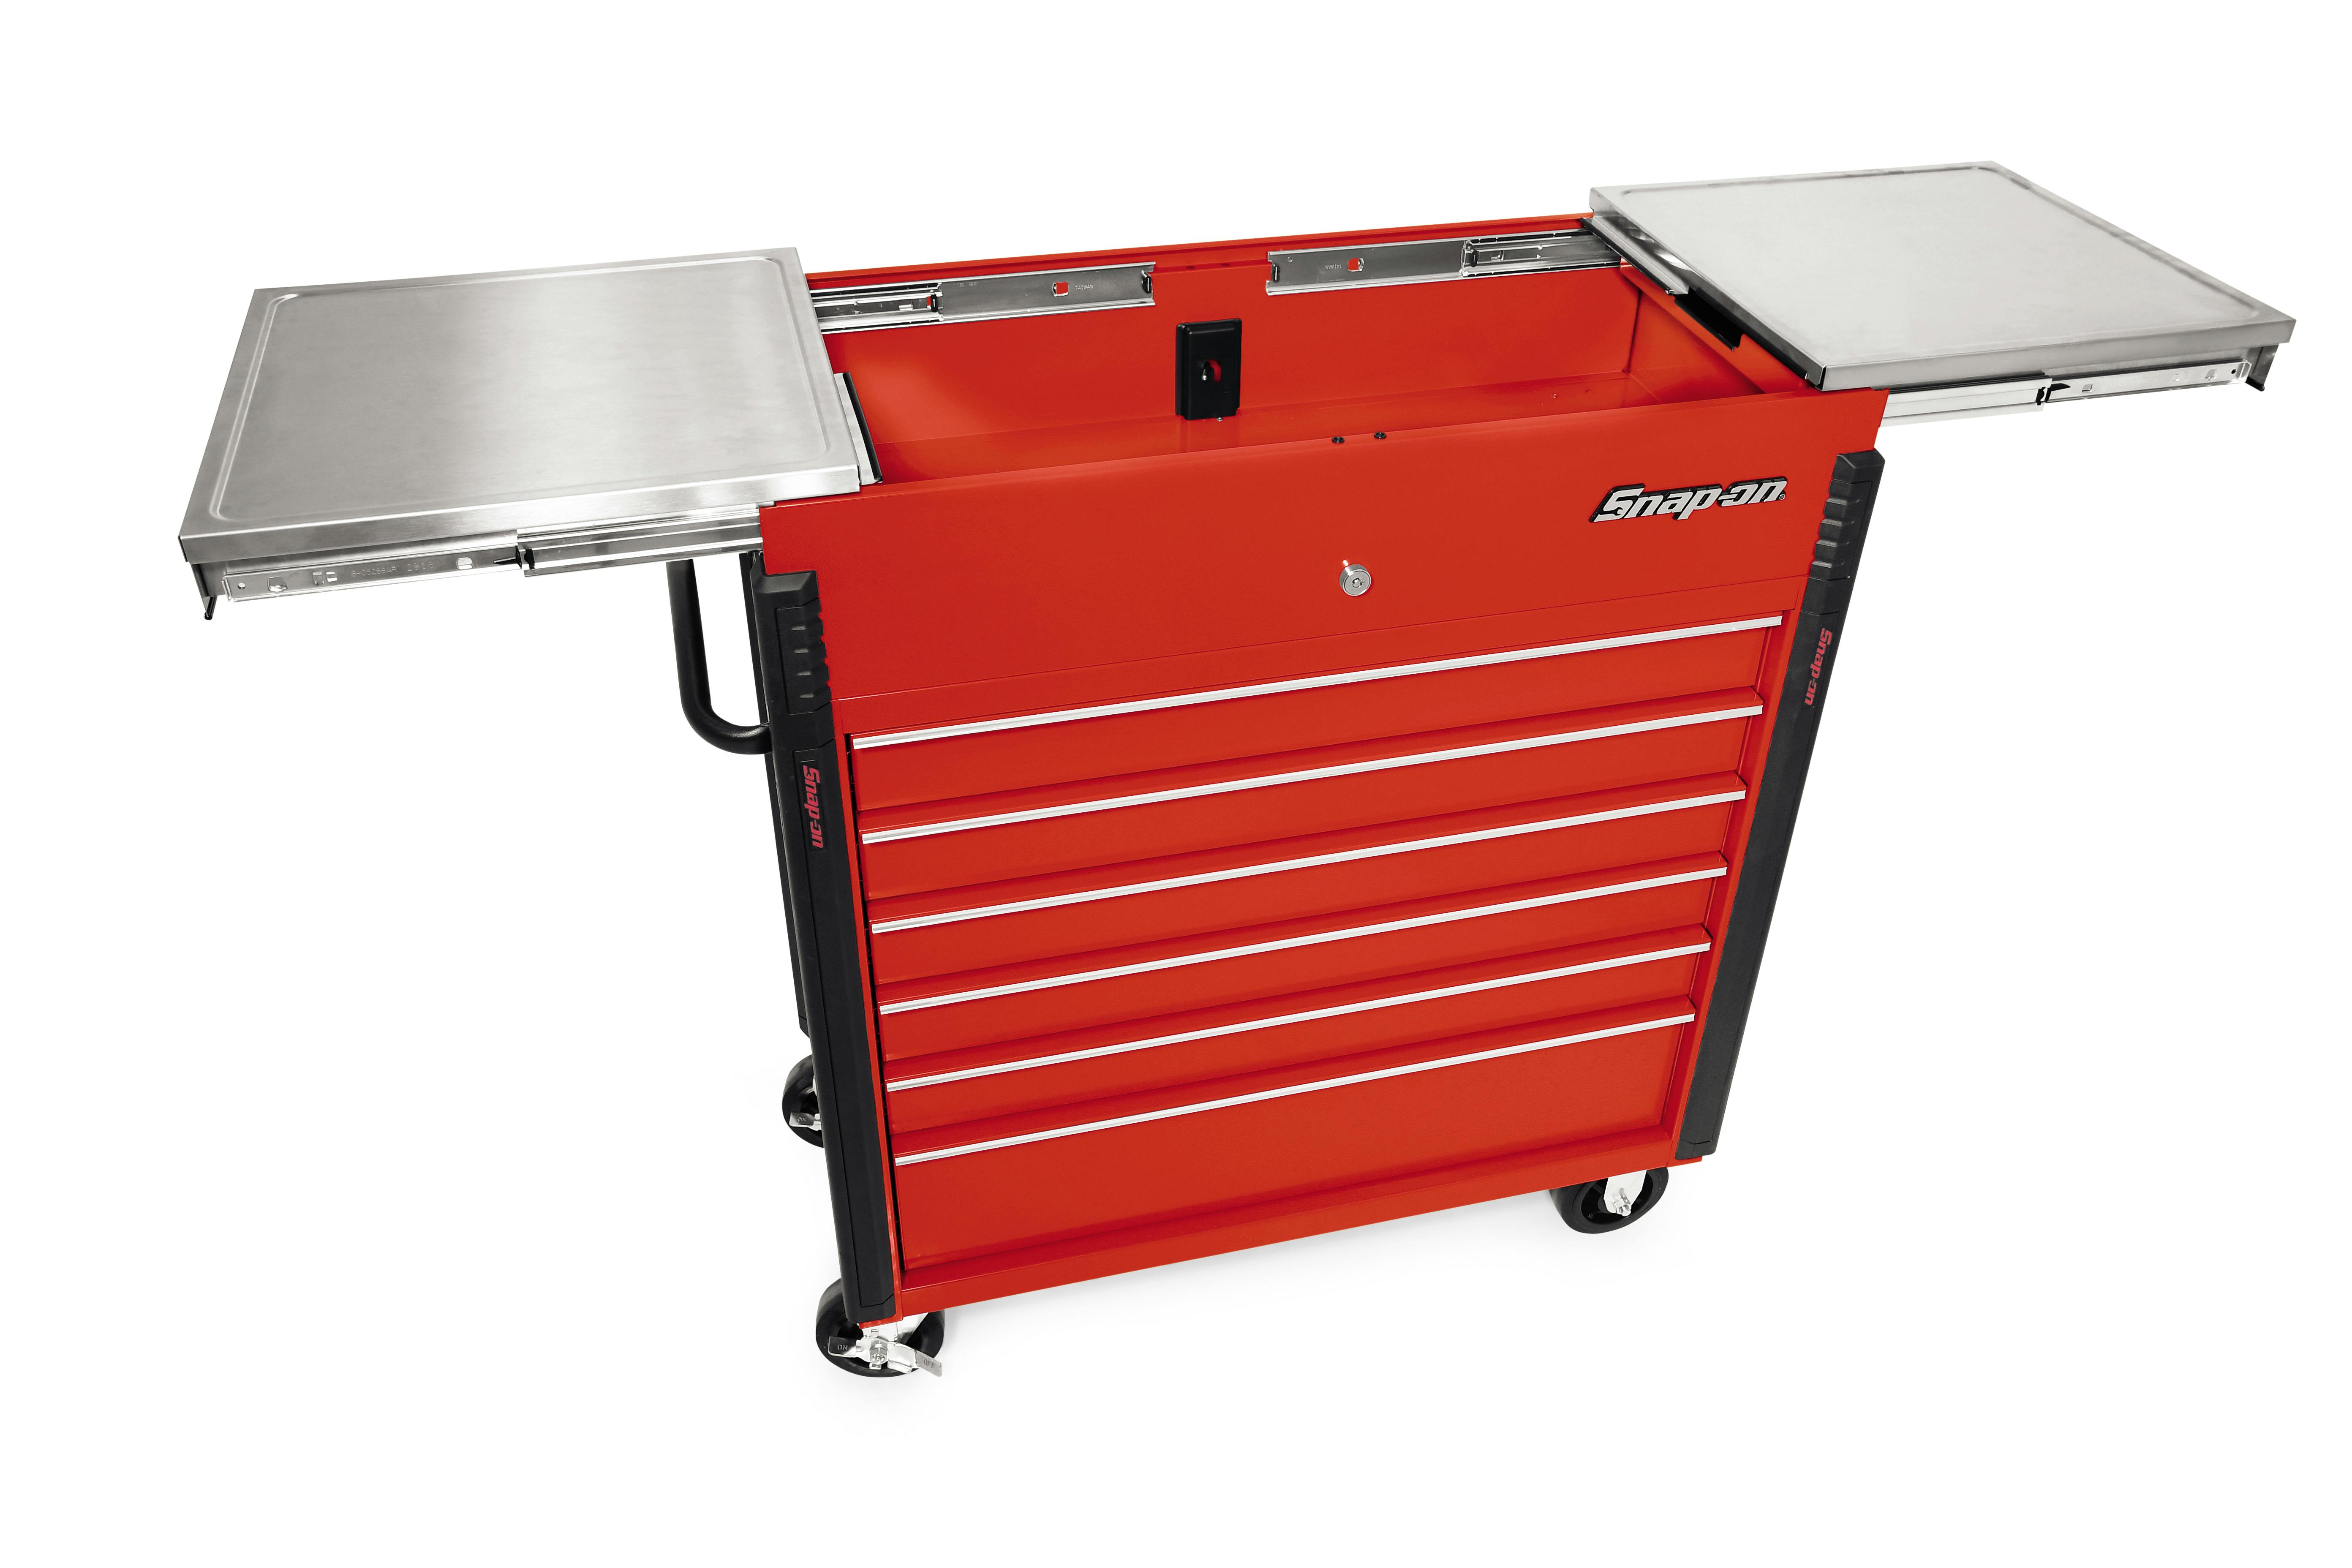 Hang-on Parts Tray (Red)